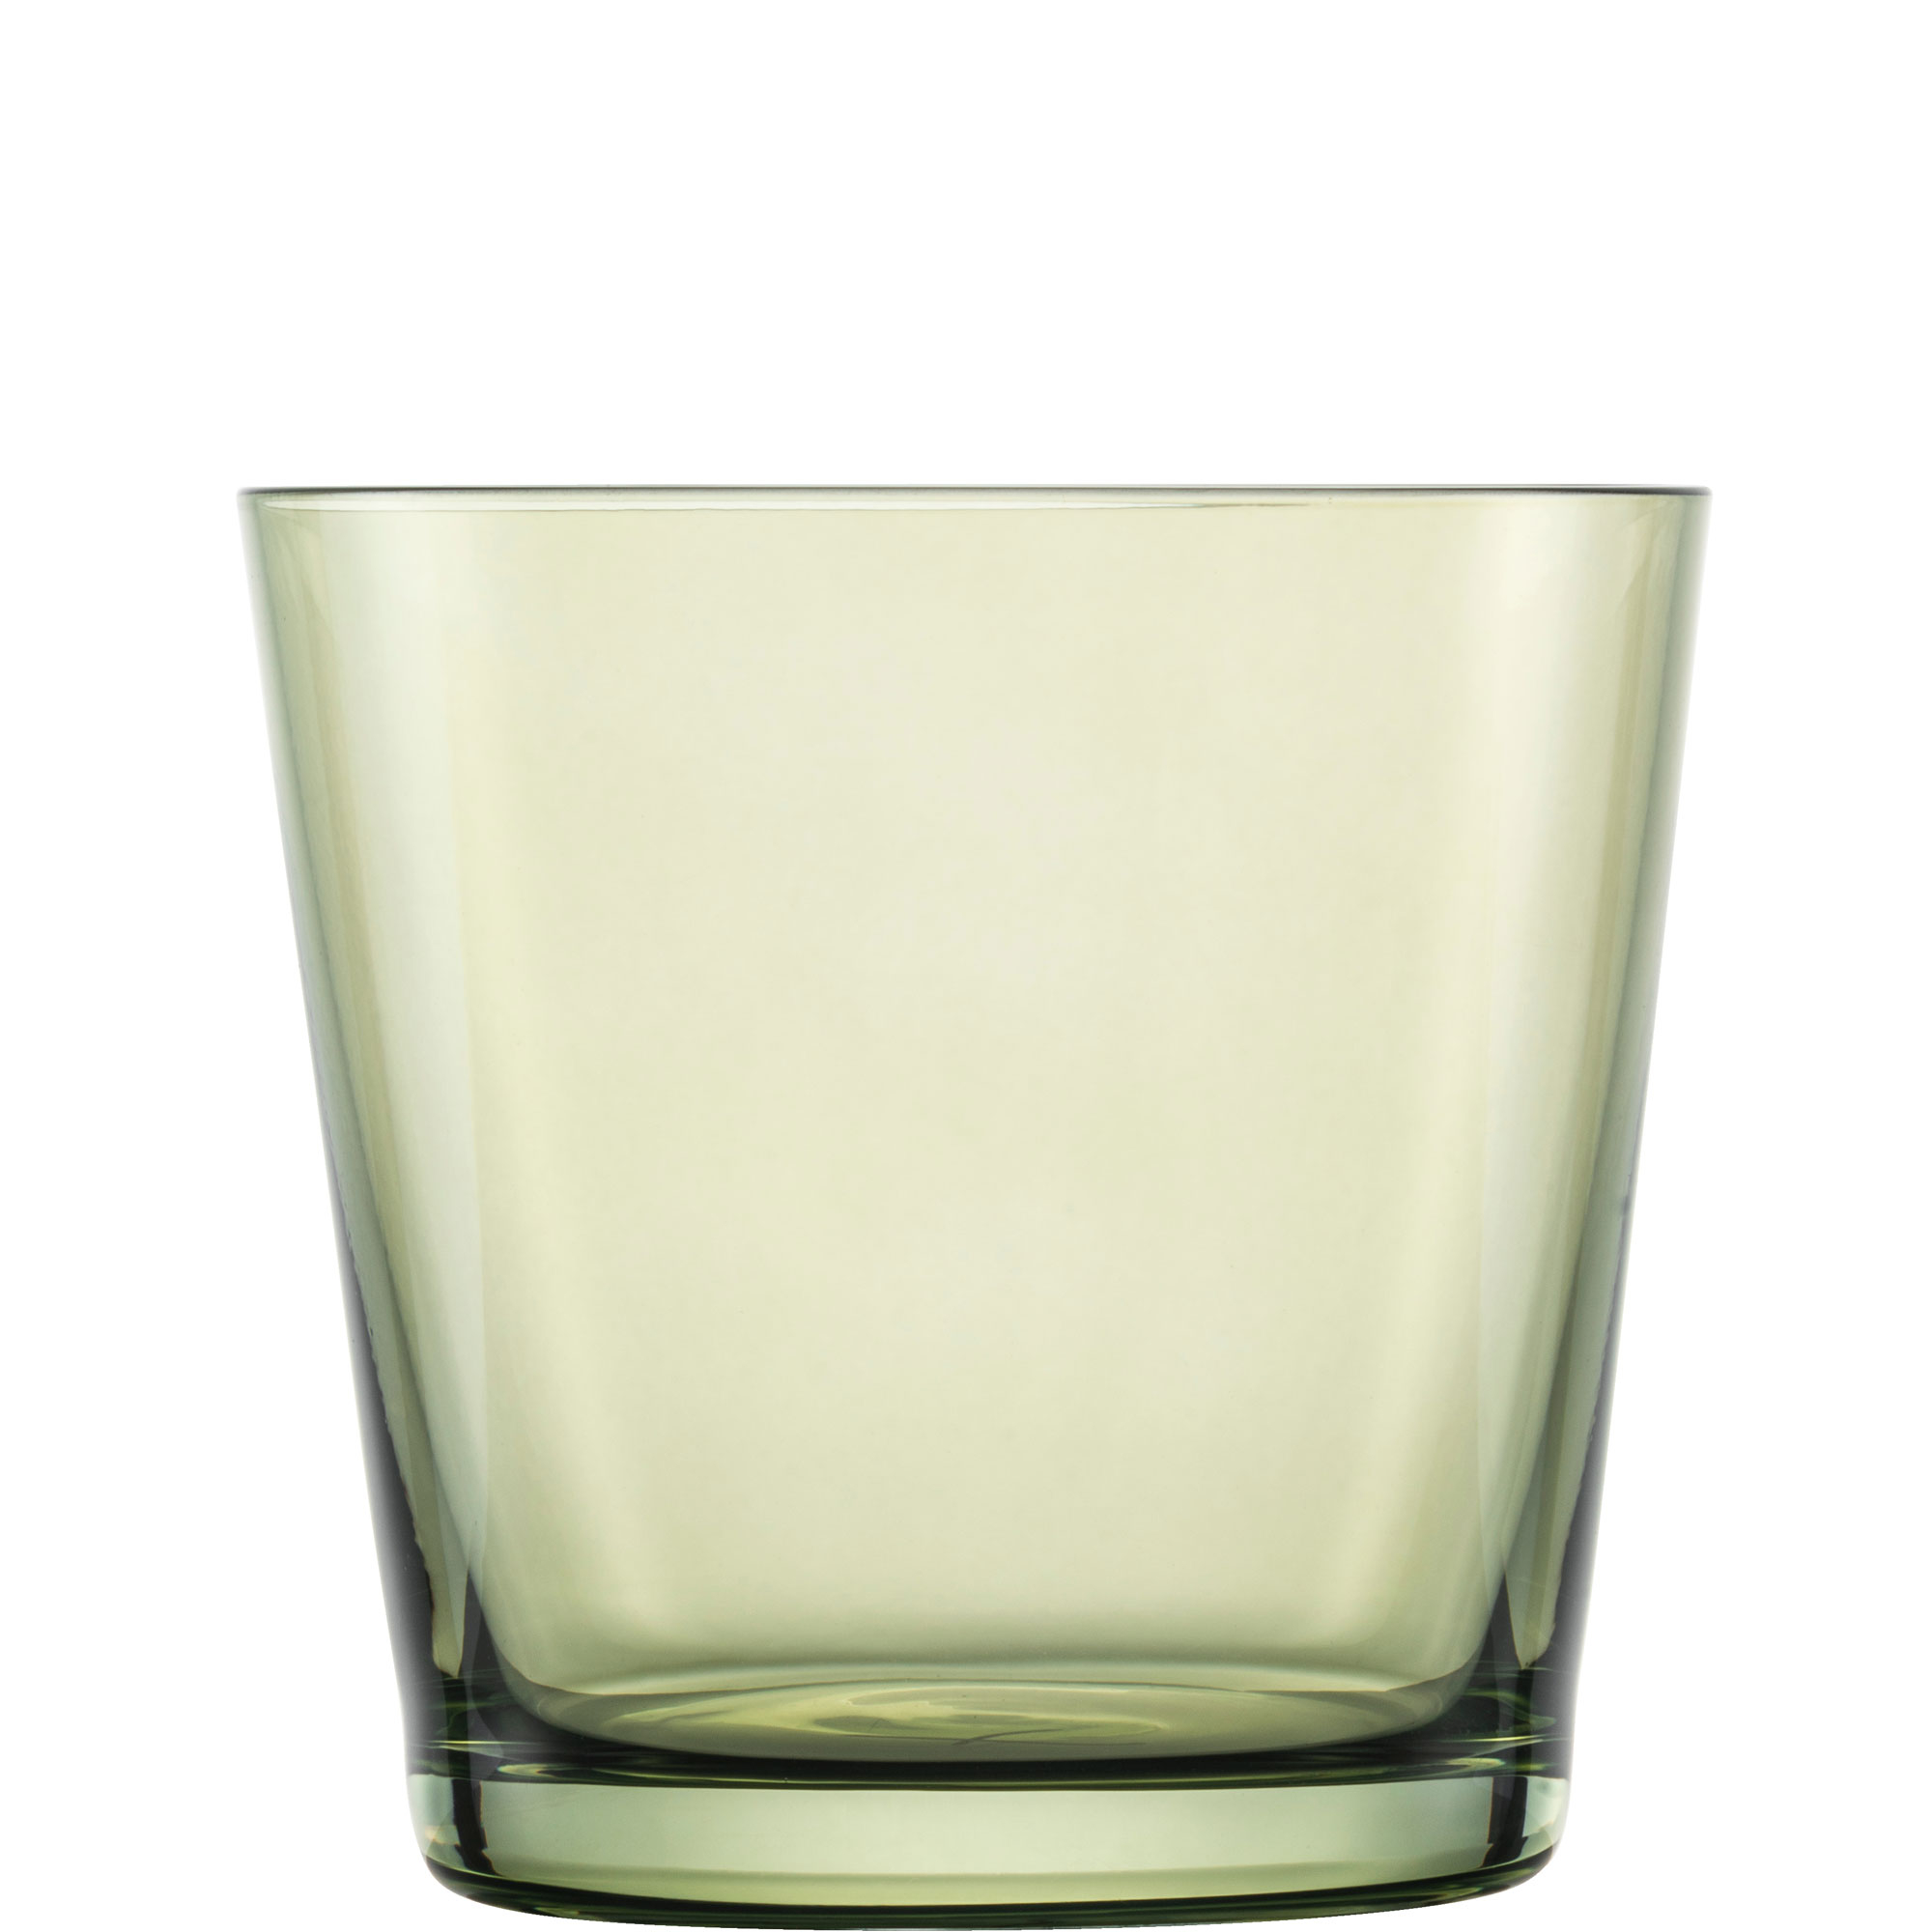 Water glass Sonido olive, Zwiesel Glas - 367ml (1 pc.)